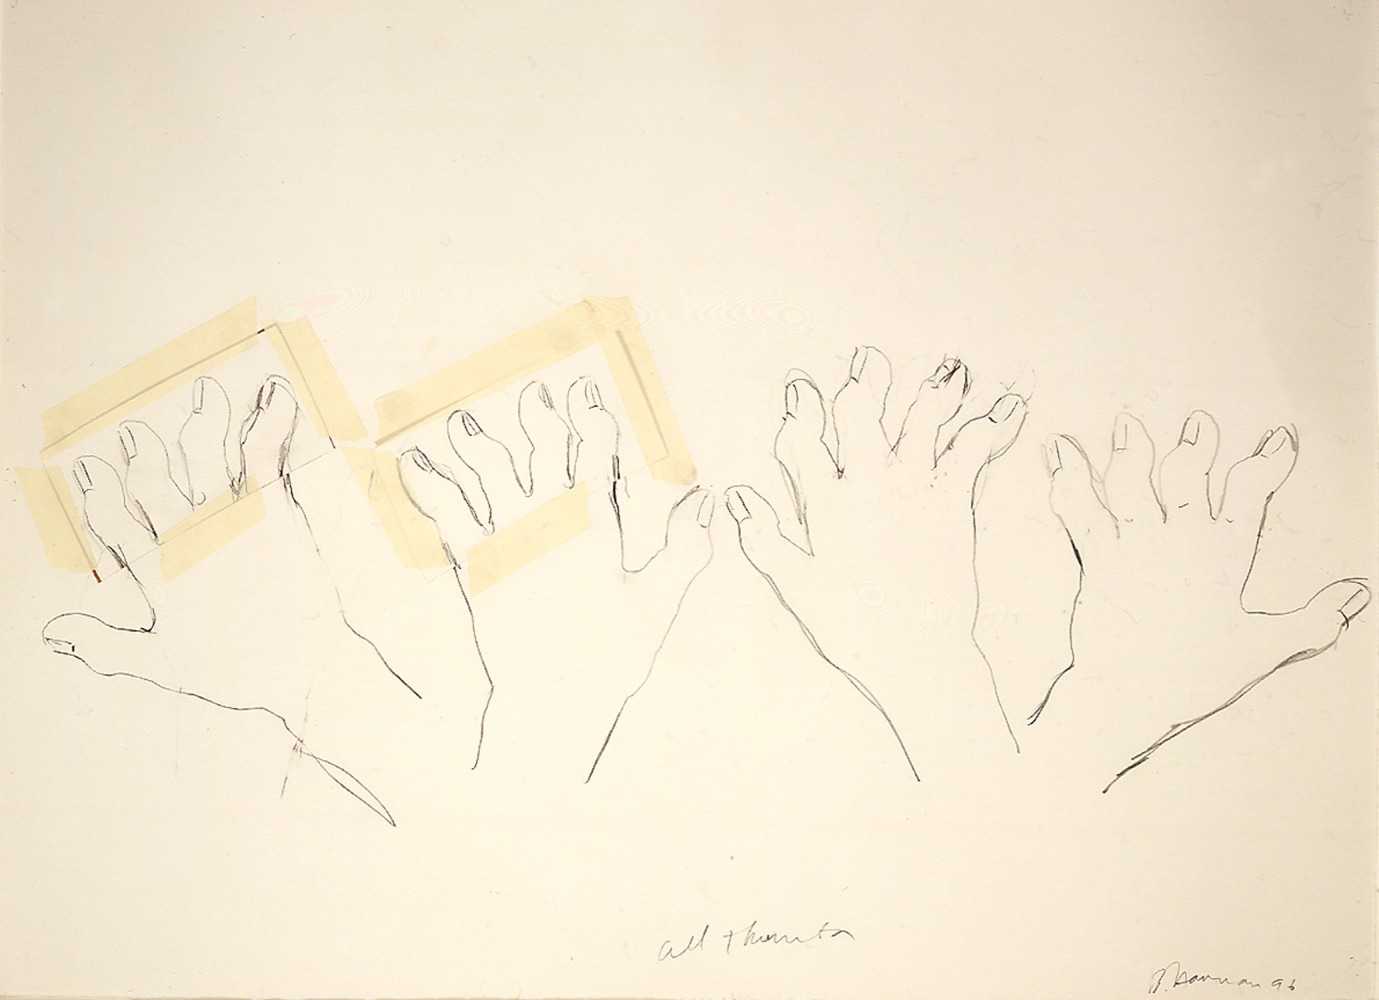 Bruce Nauman
All Thumbs, 1996
graphite and masking tape on paper
22 1/4 x 30 1/8 inches (56,5 x 76,5 cm)
24 1/4 x 32 inches (61,6 x 81,3 cm) frame
SW 96333
Private Collection